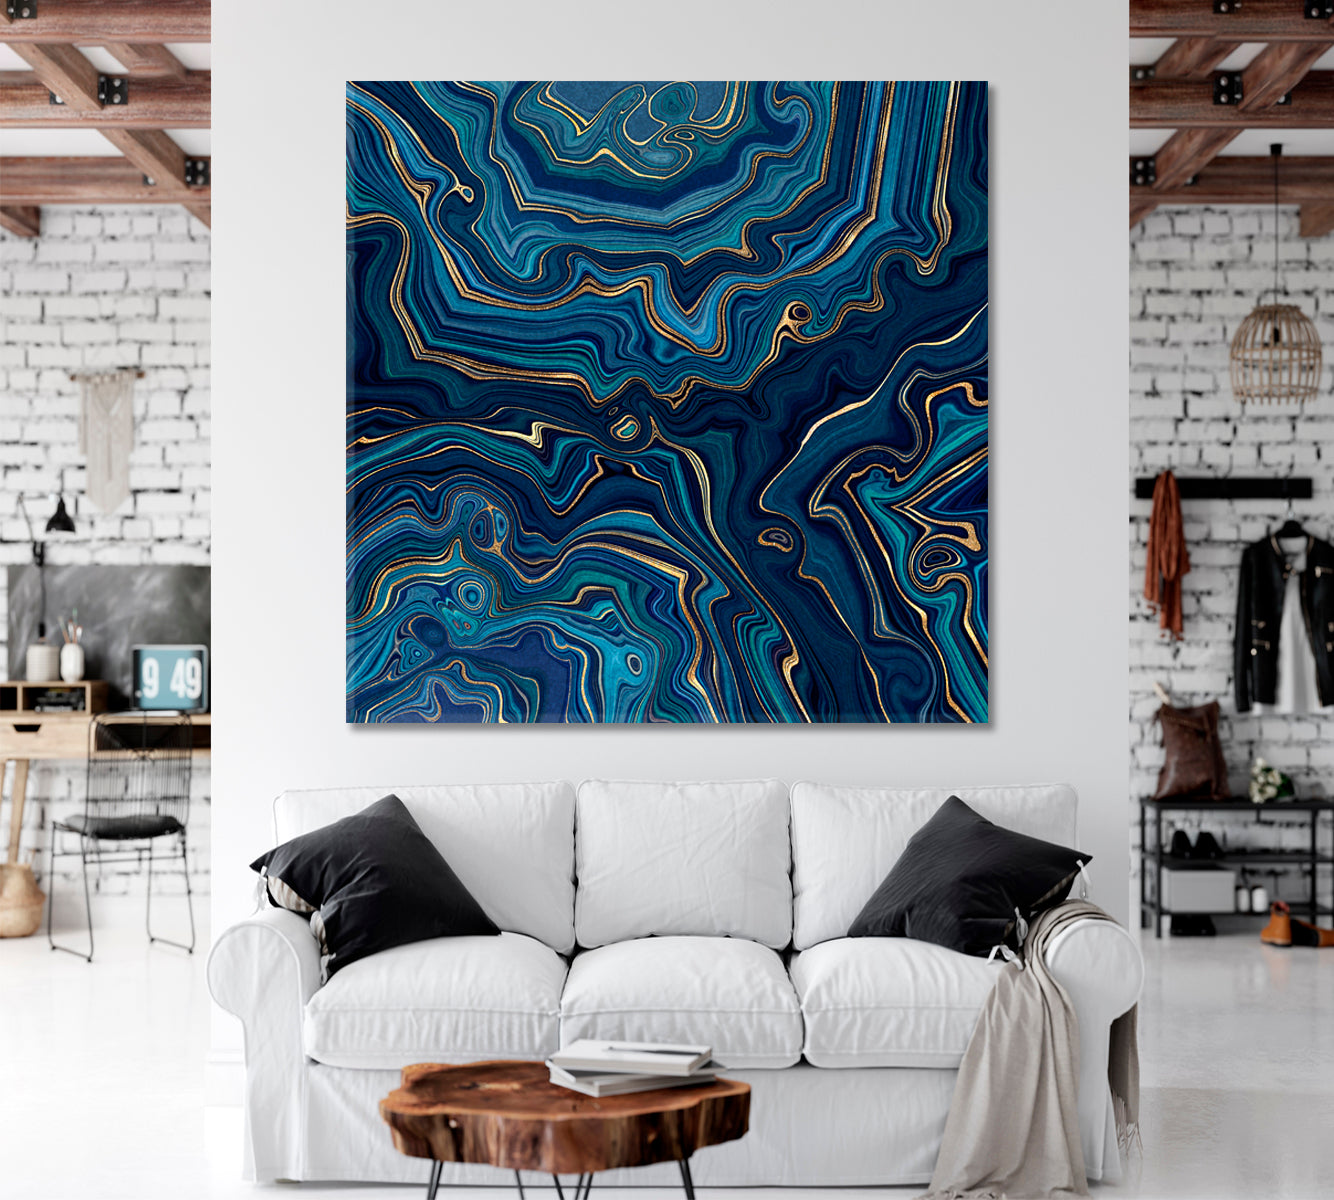 Dark Blue And Gold Abstract Marble Effect Canvas Print - Square Abstract Art Print Artesty   